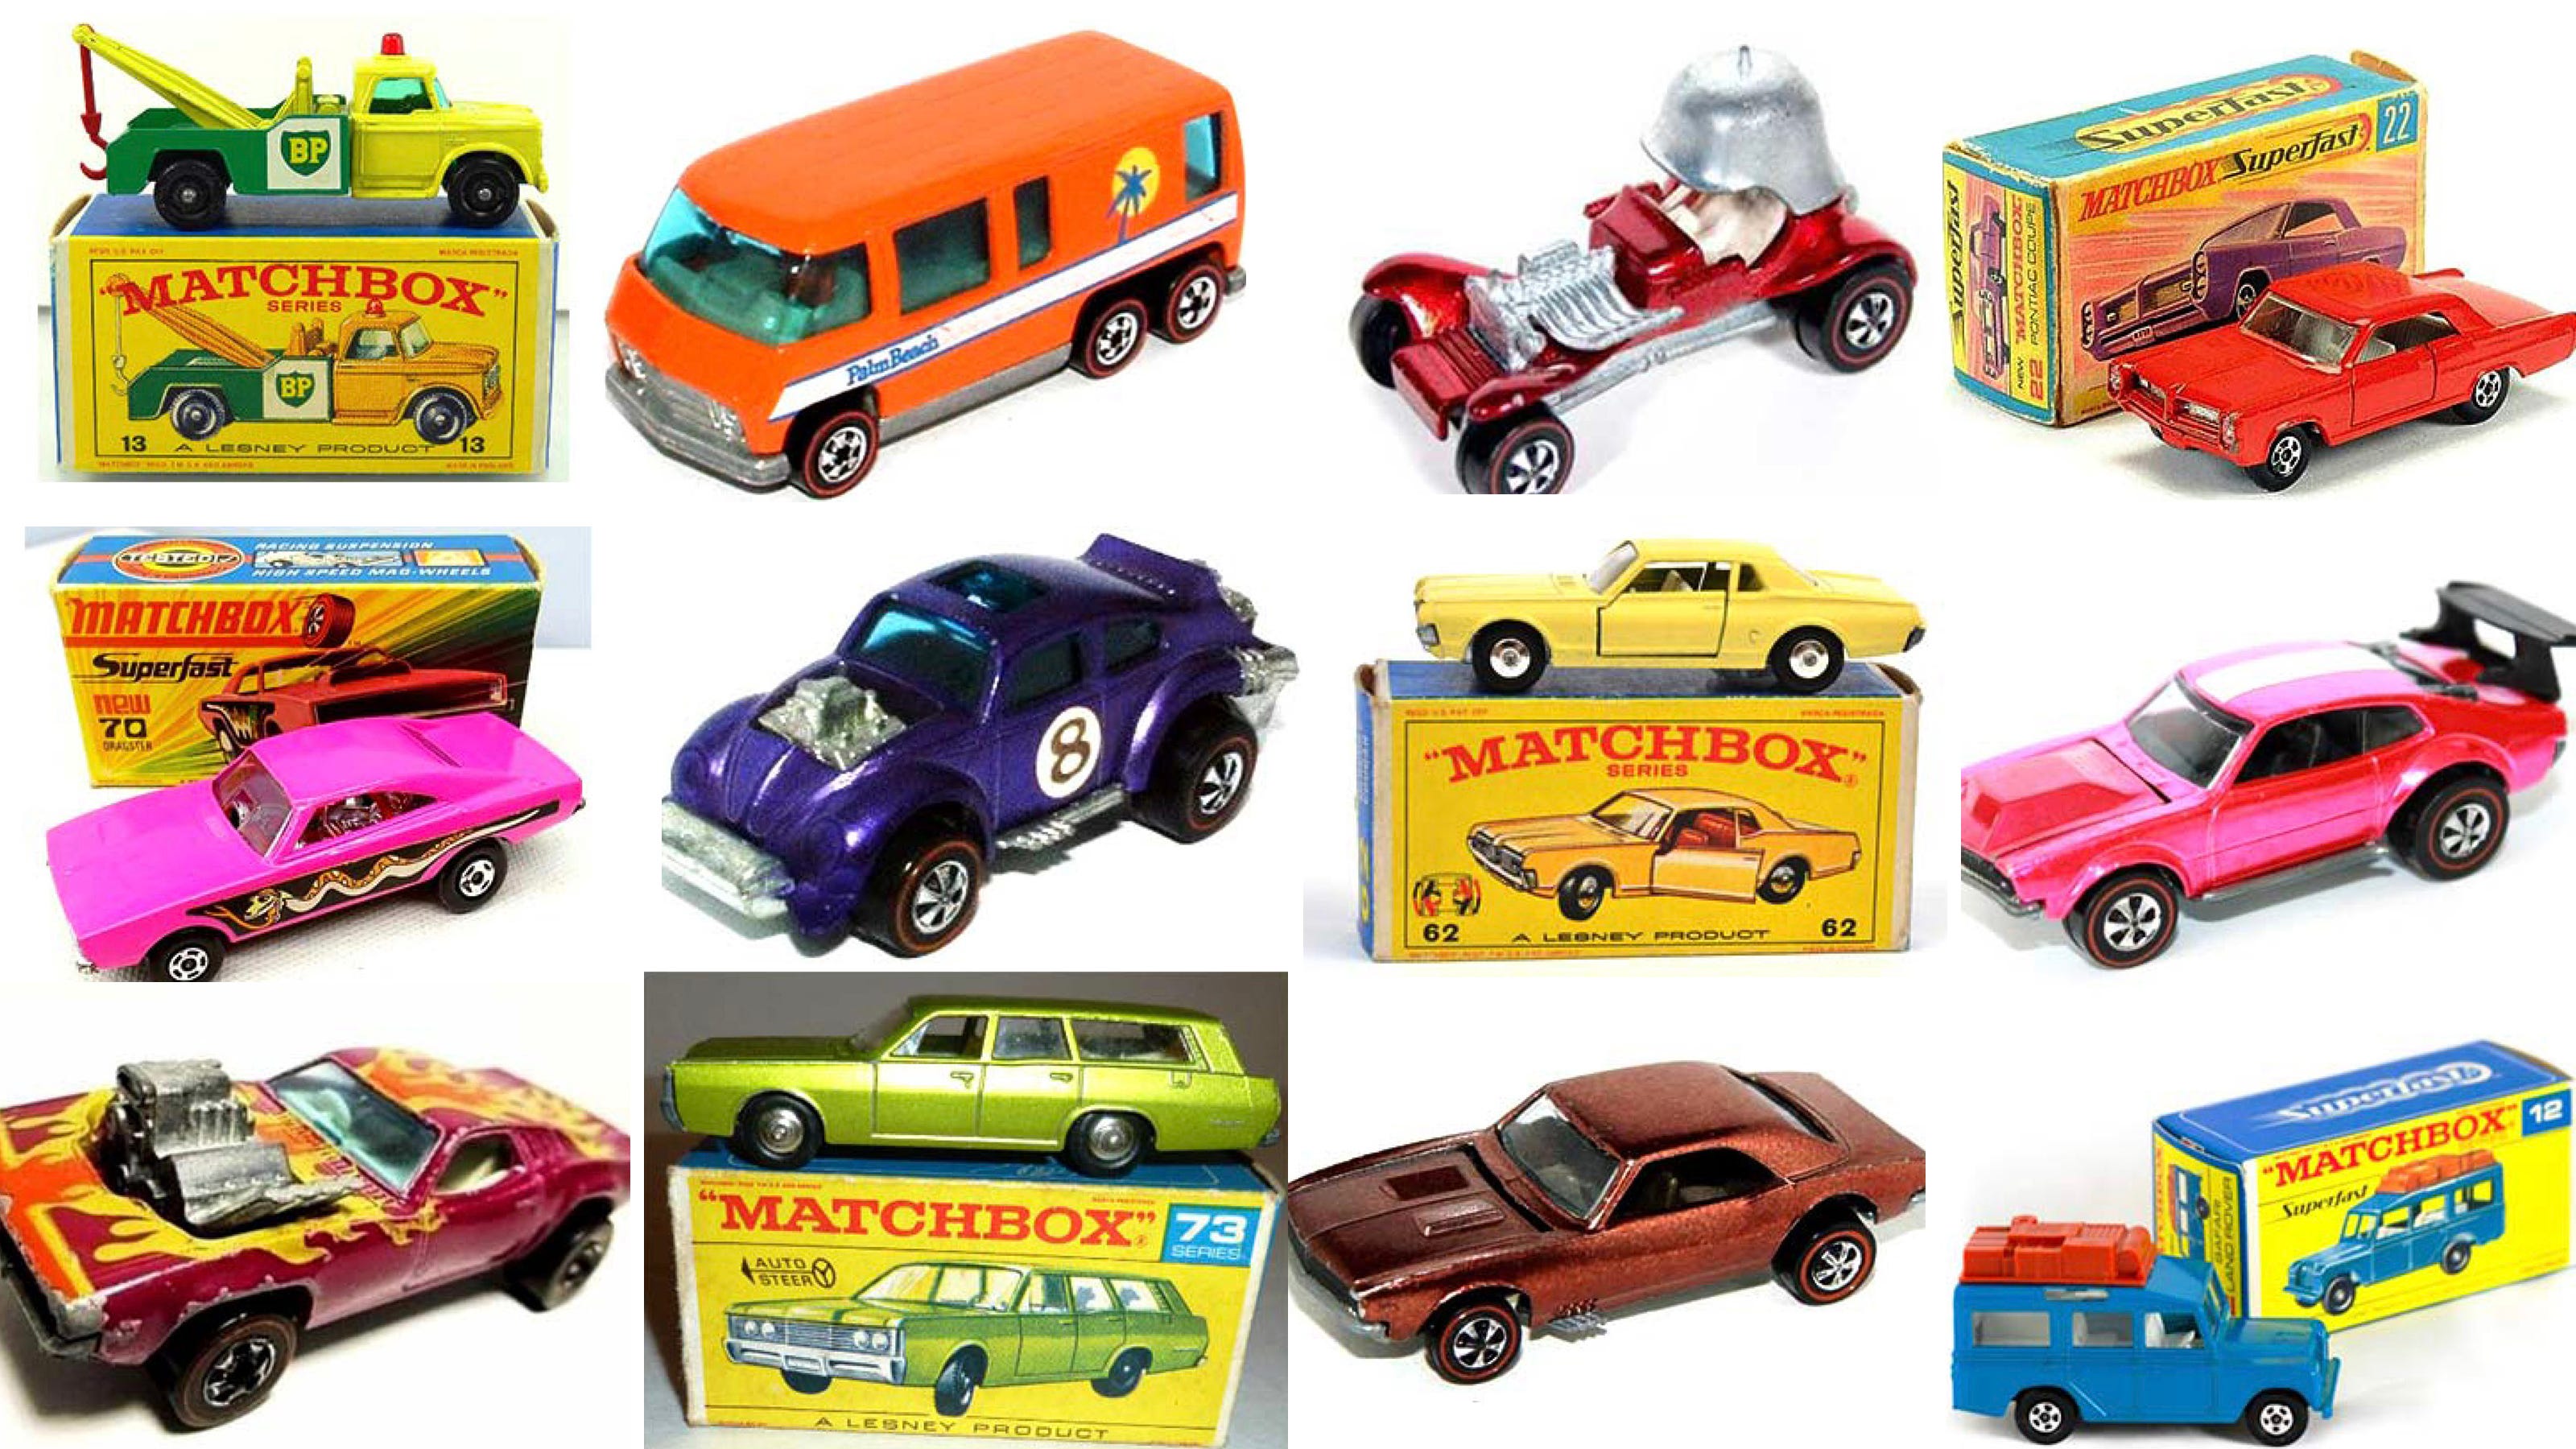 Most expensive Hot Wheels and Matchbox 